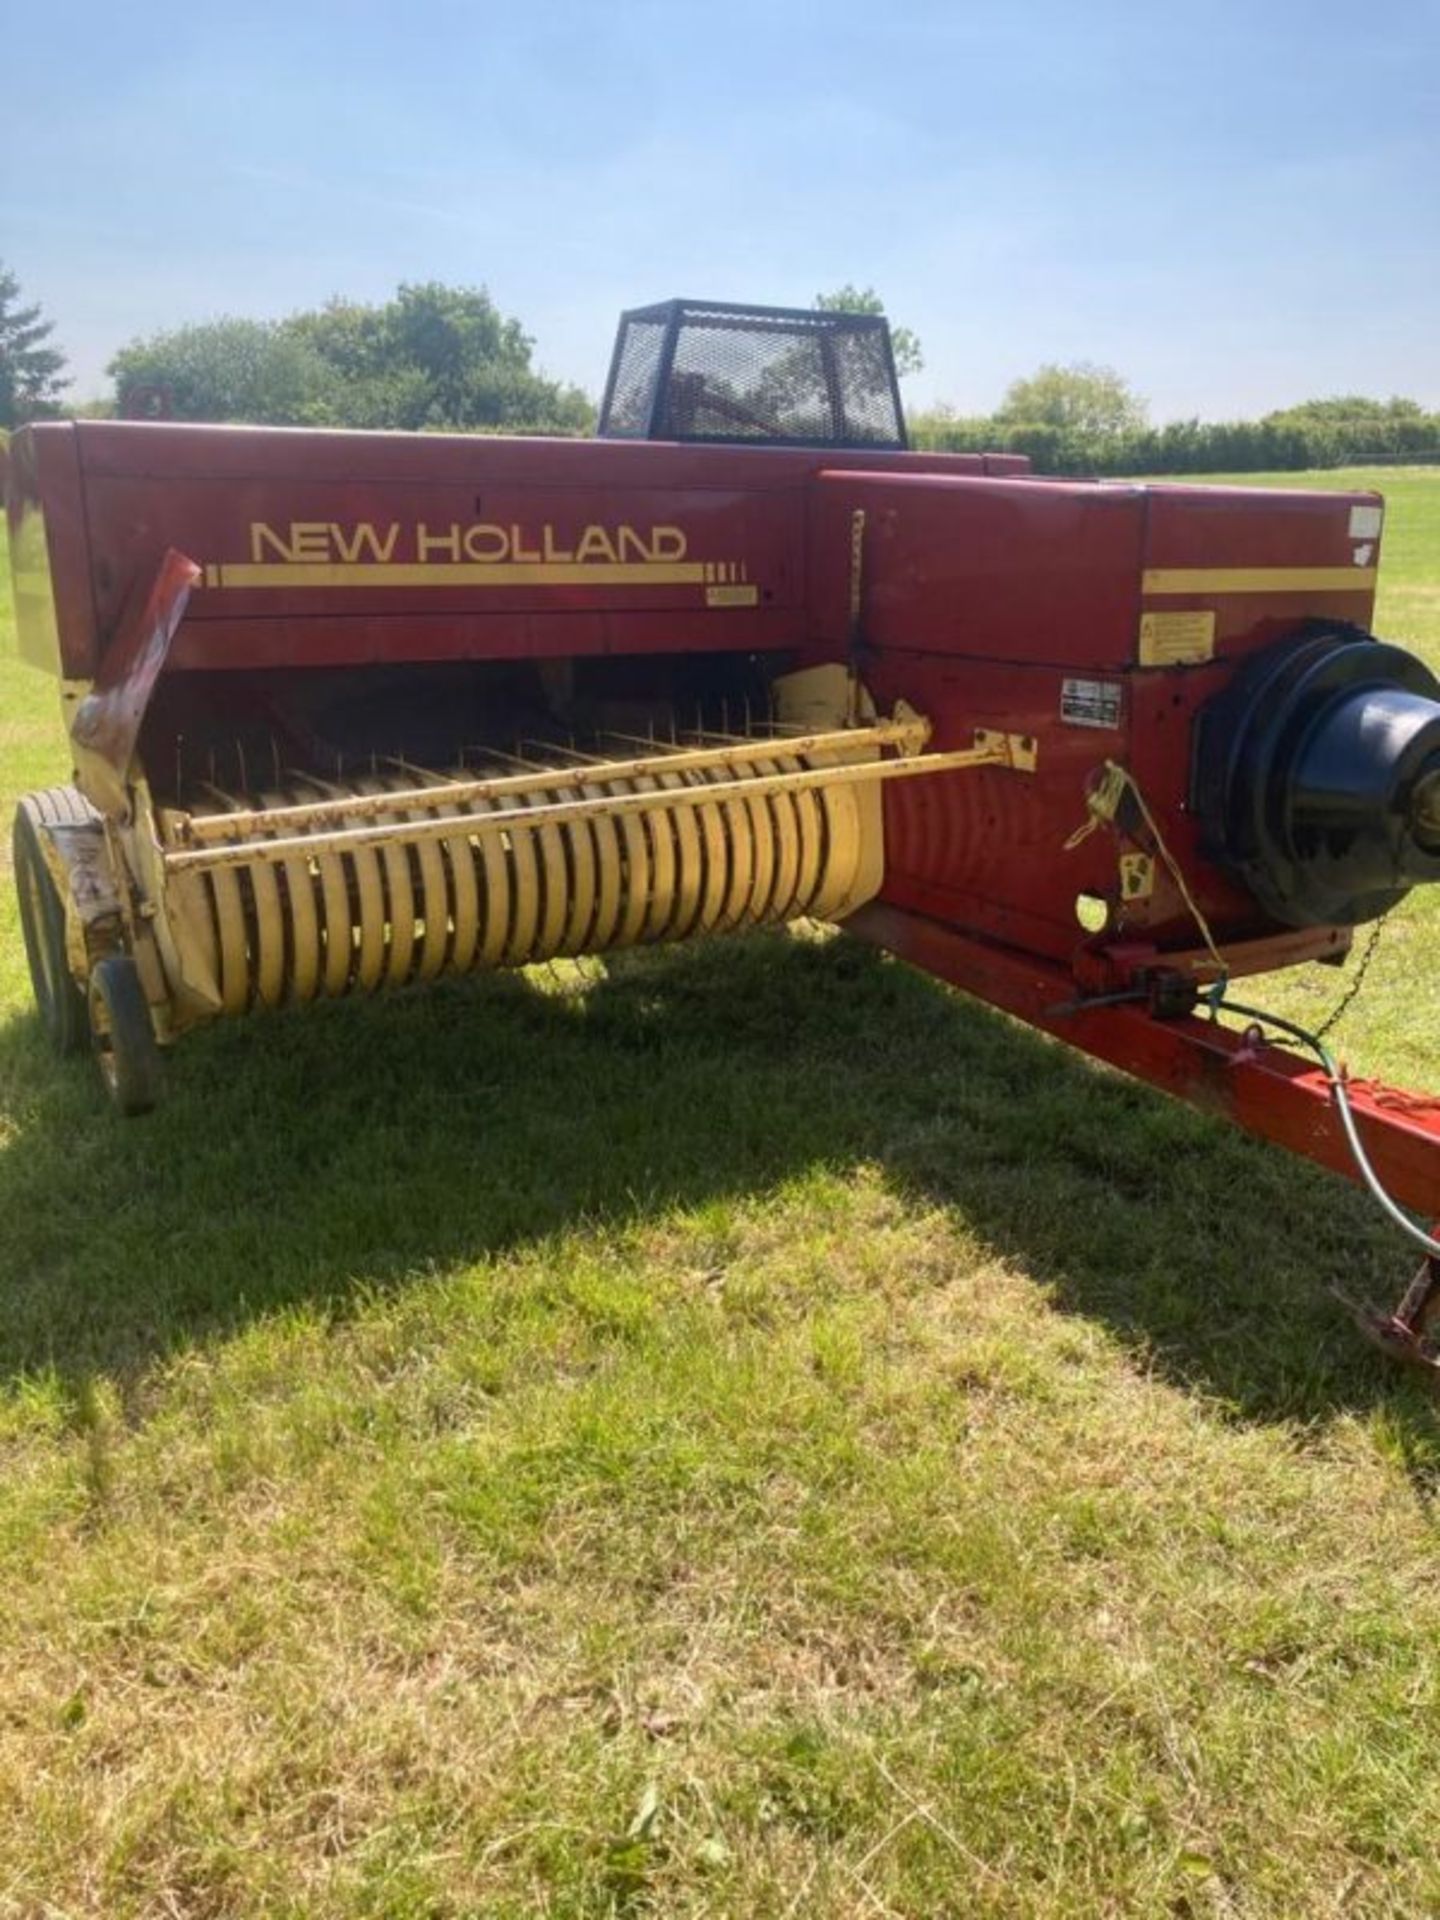 NEW HOLLAND 570 CONVENTIONAL BALER - Image 7 of 10